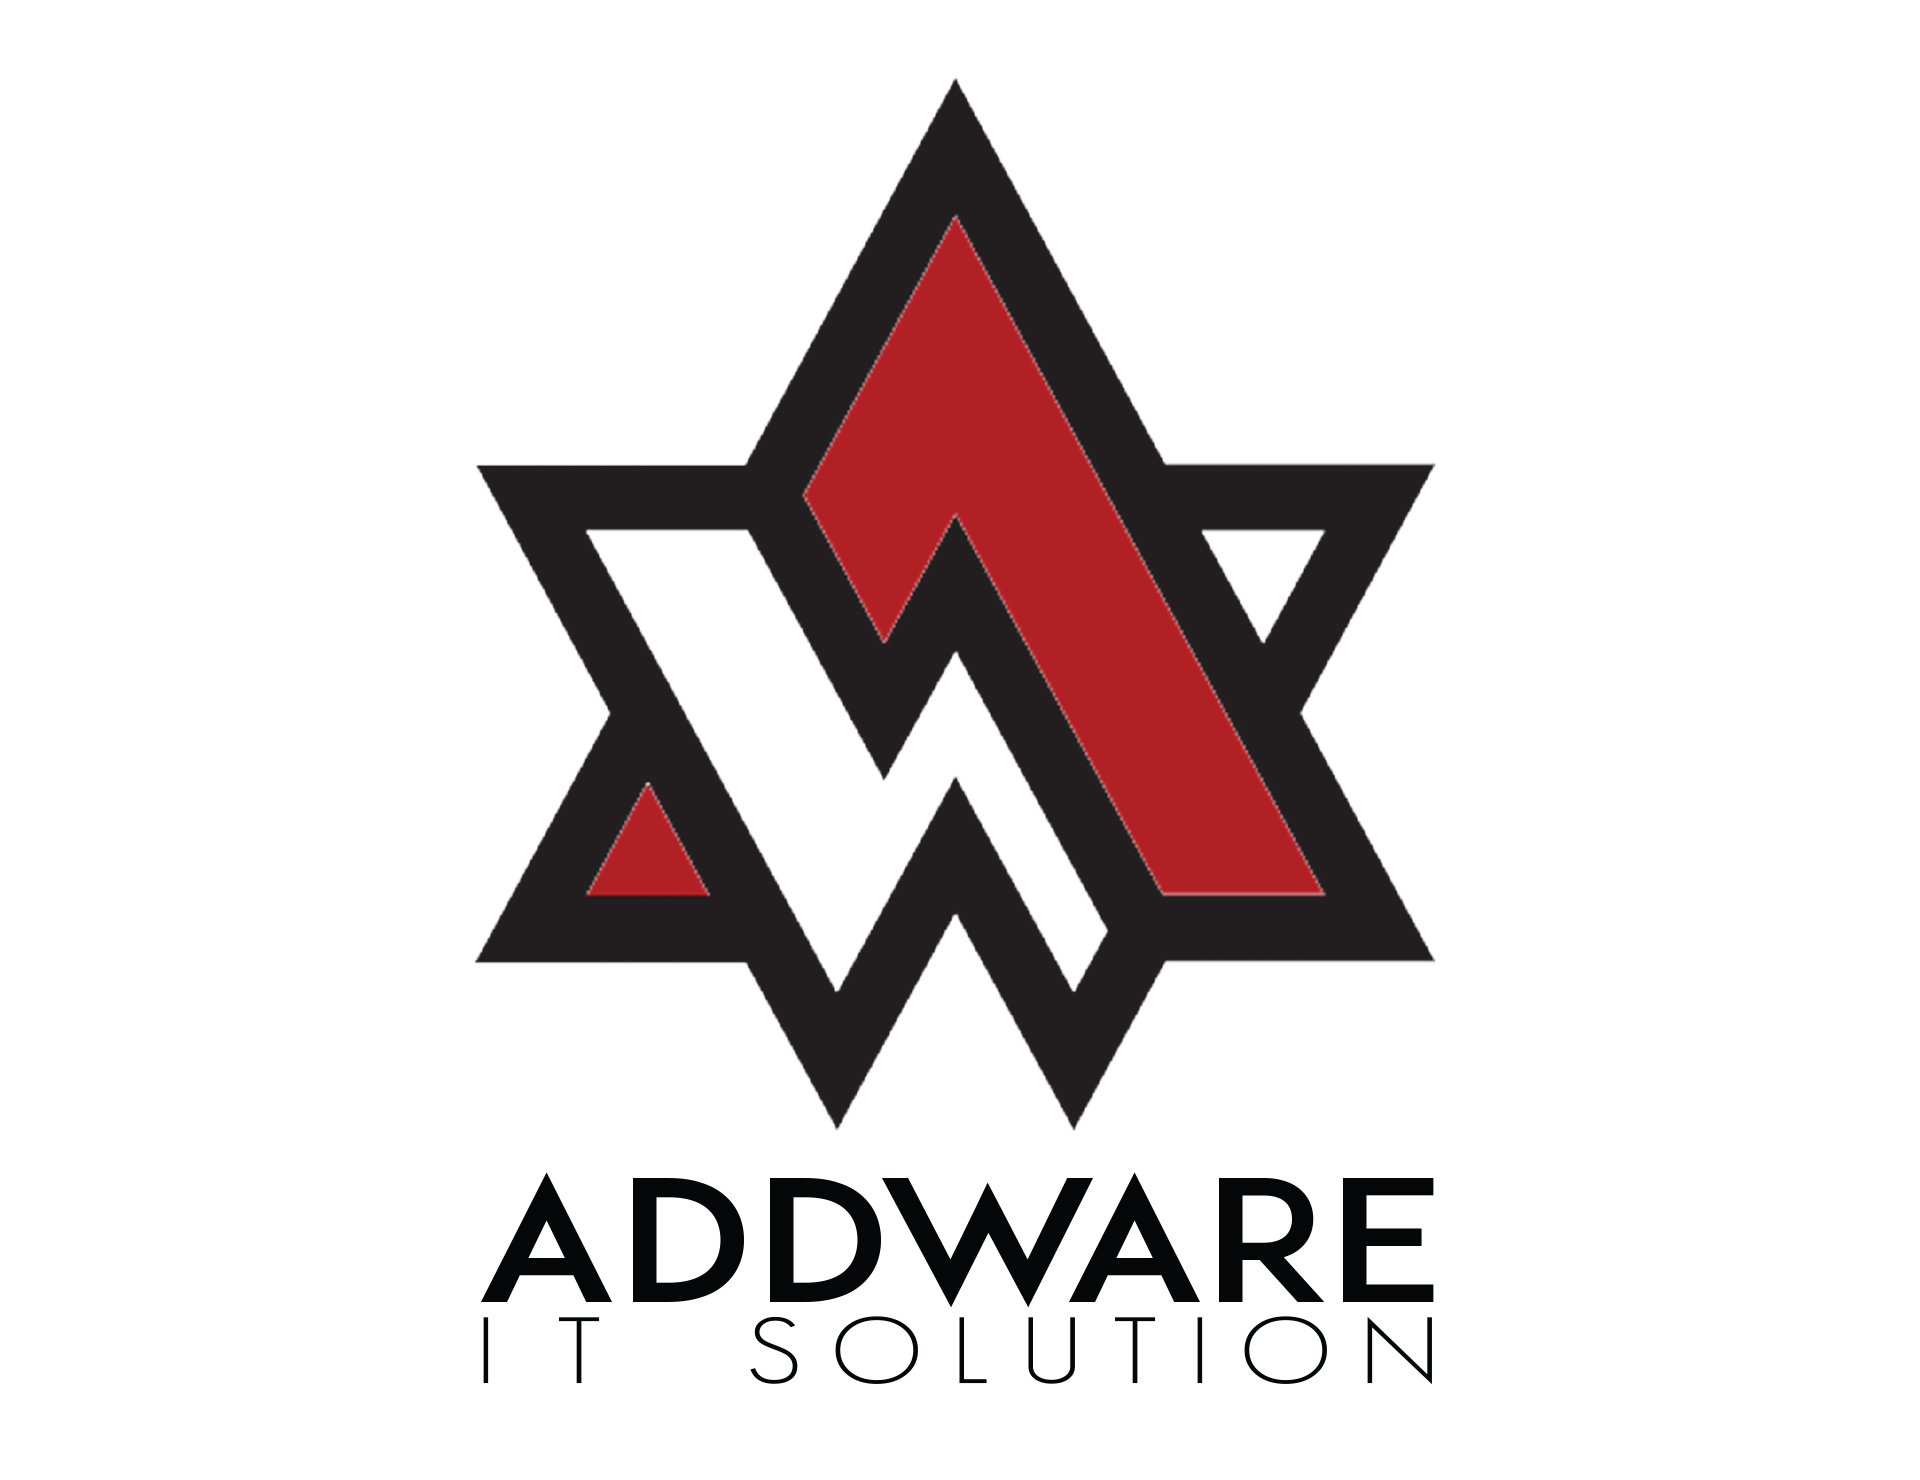 Addware IT Solution